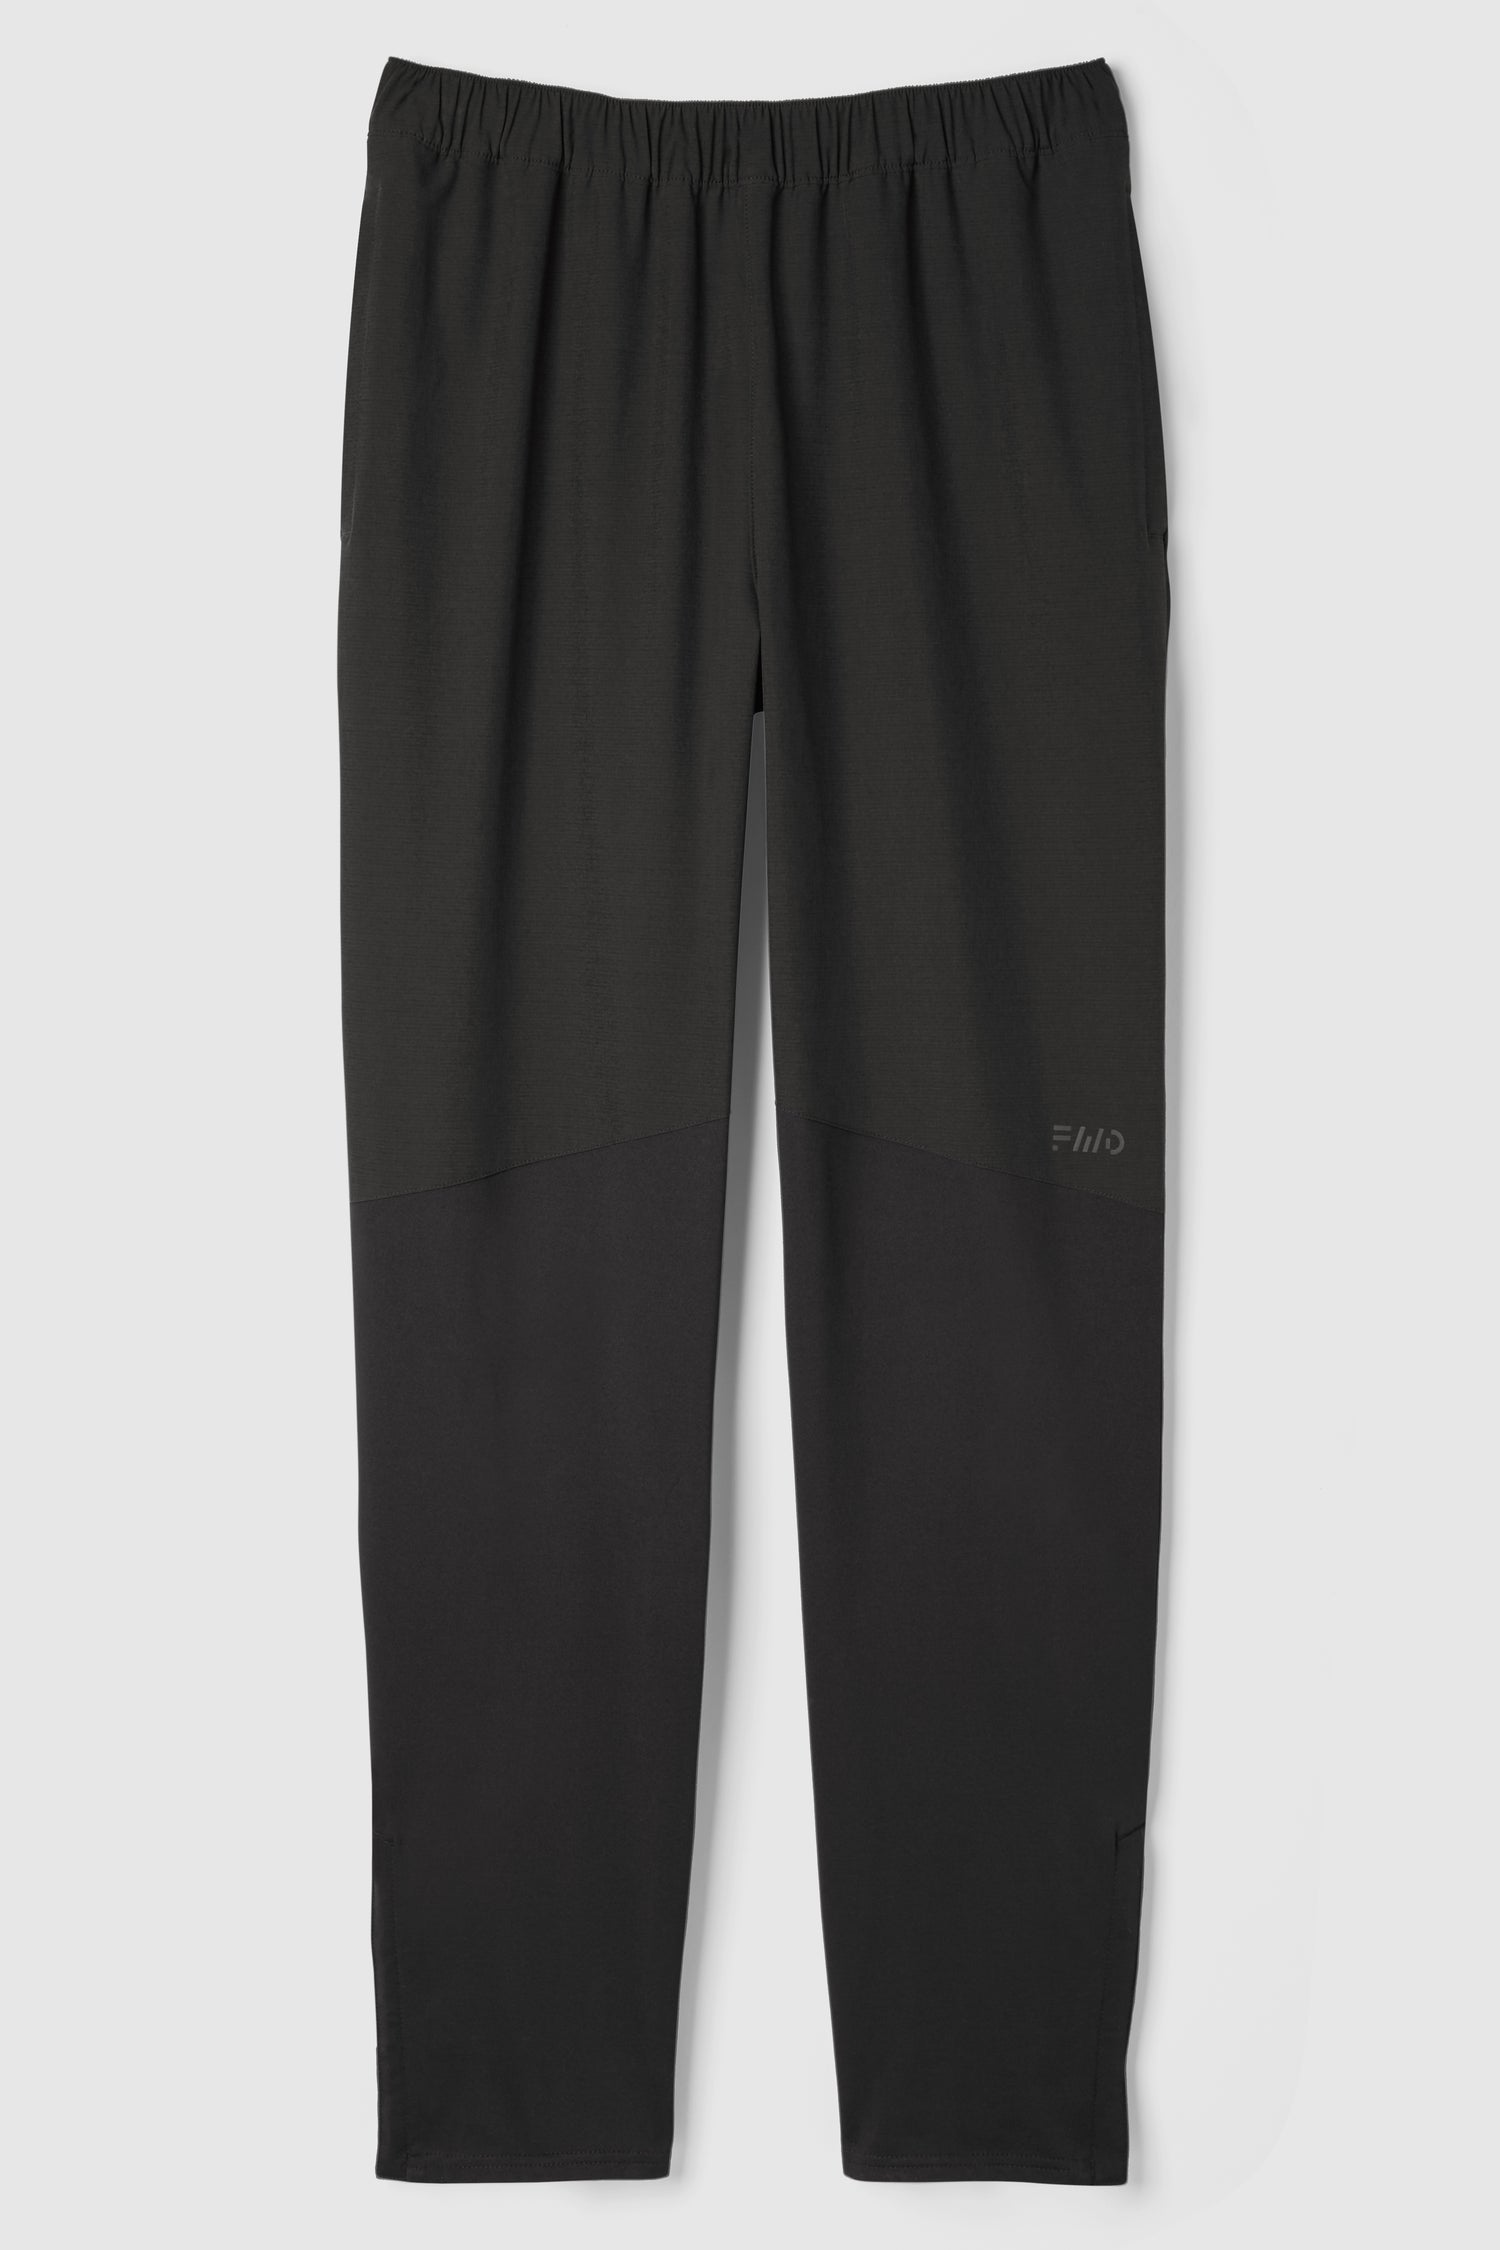 Free FWD Men's OT Tapered Training Pants - BEST SELLING